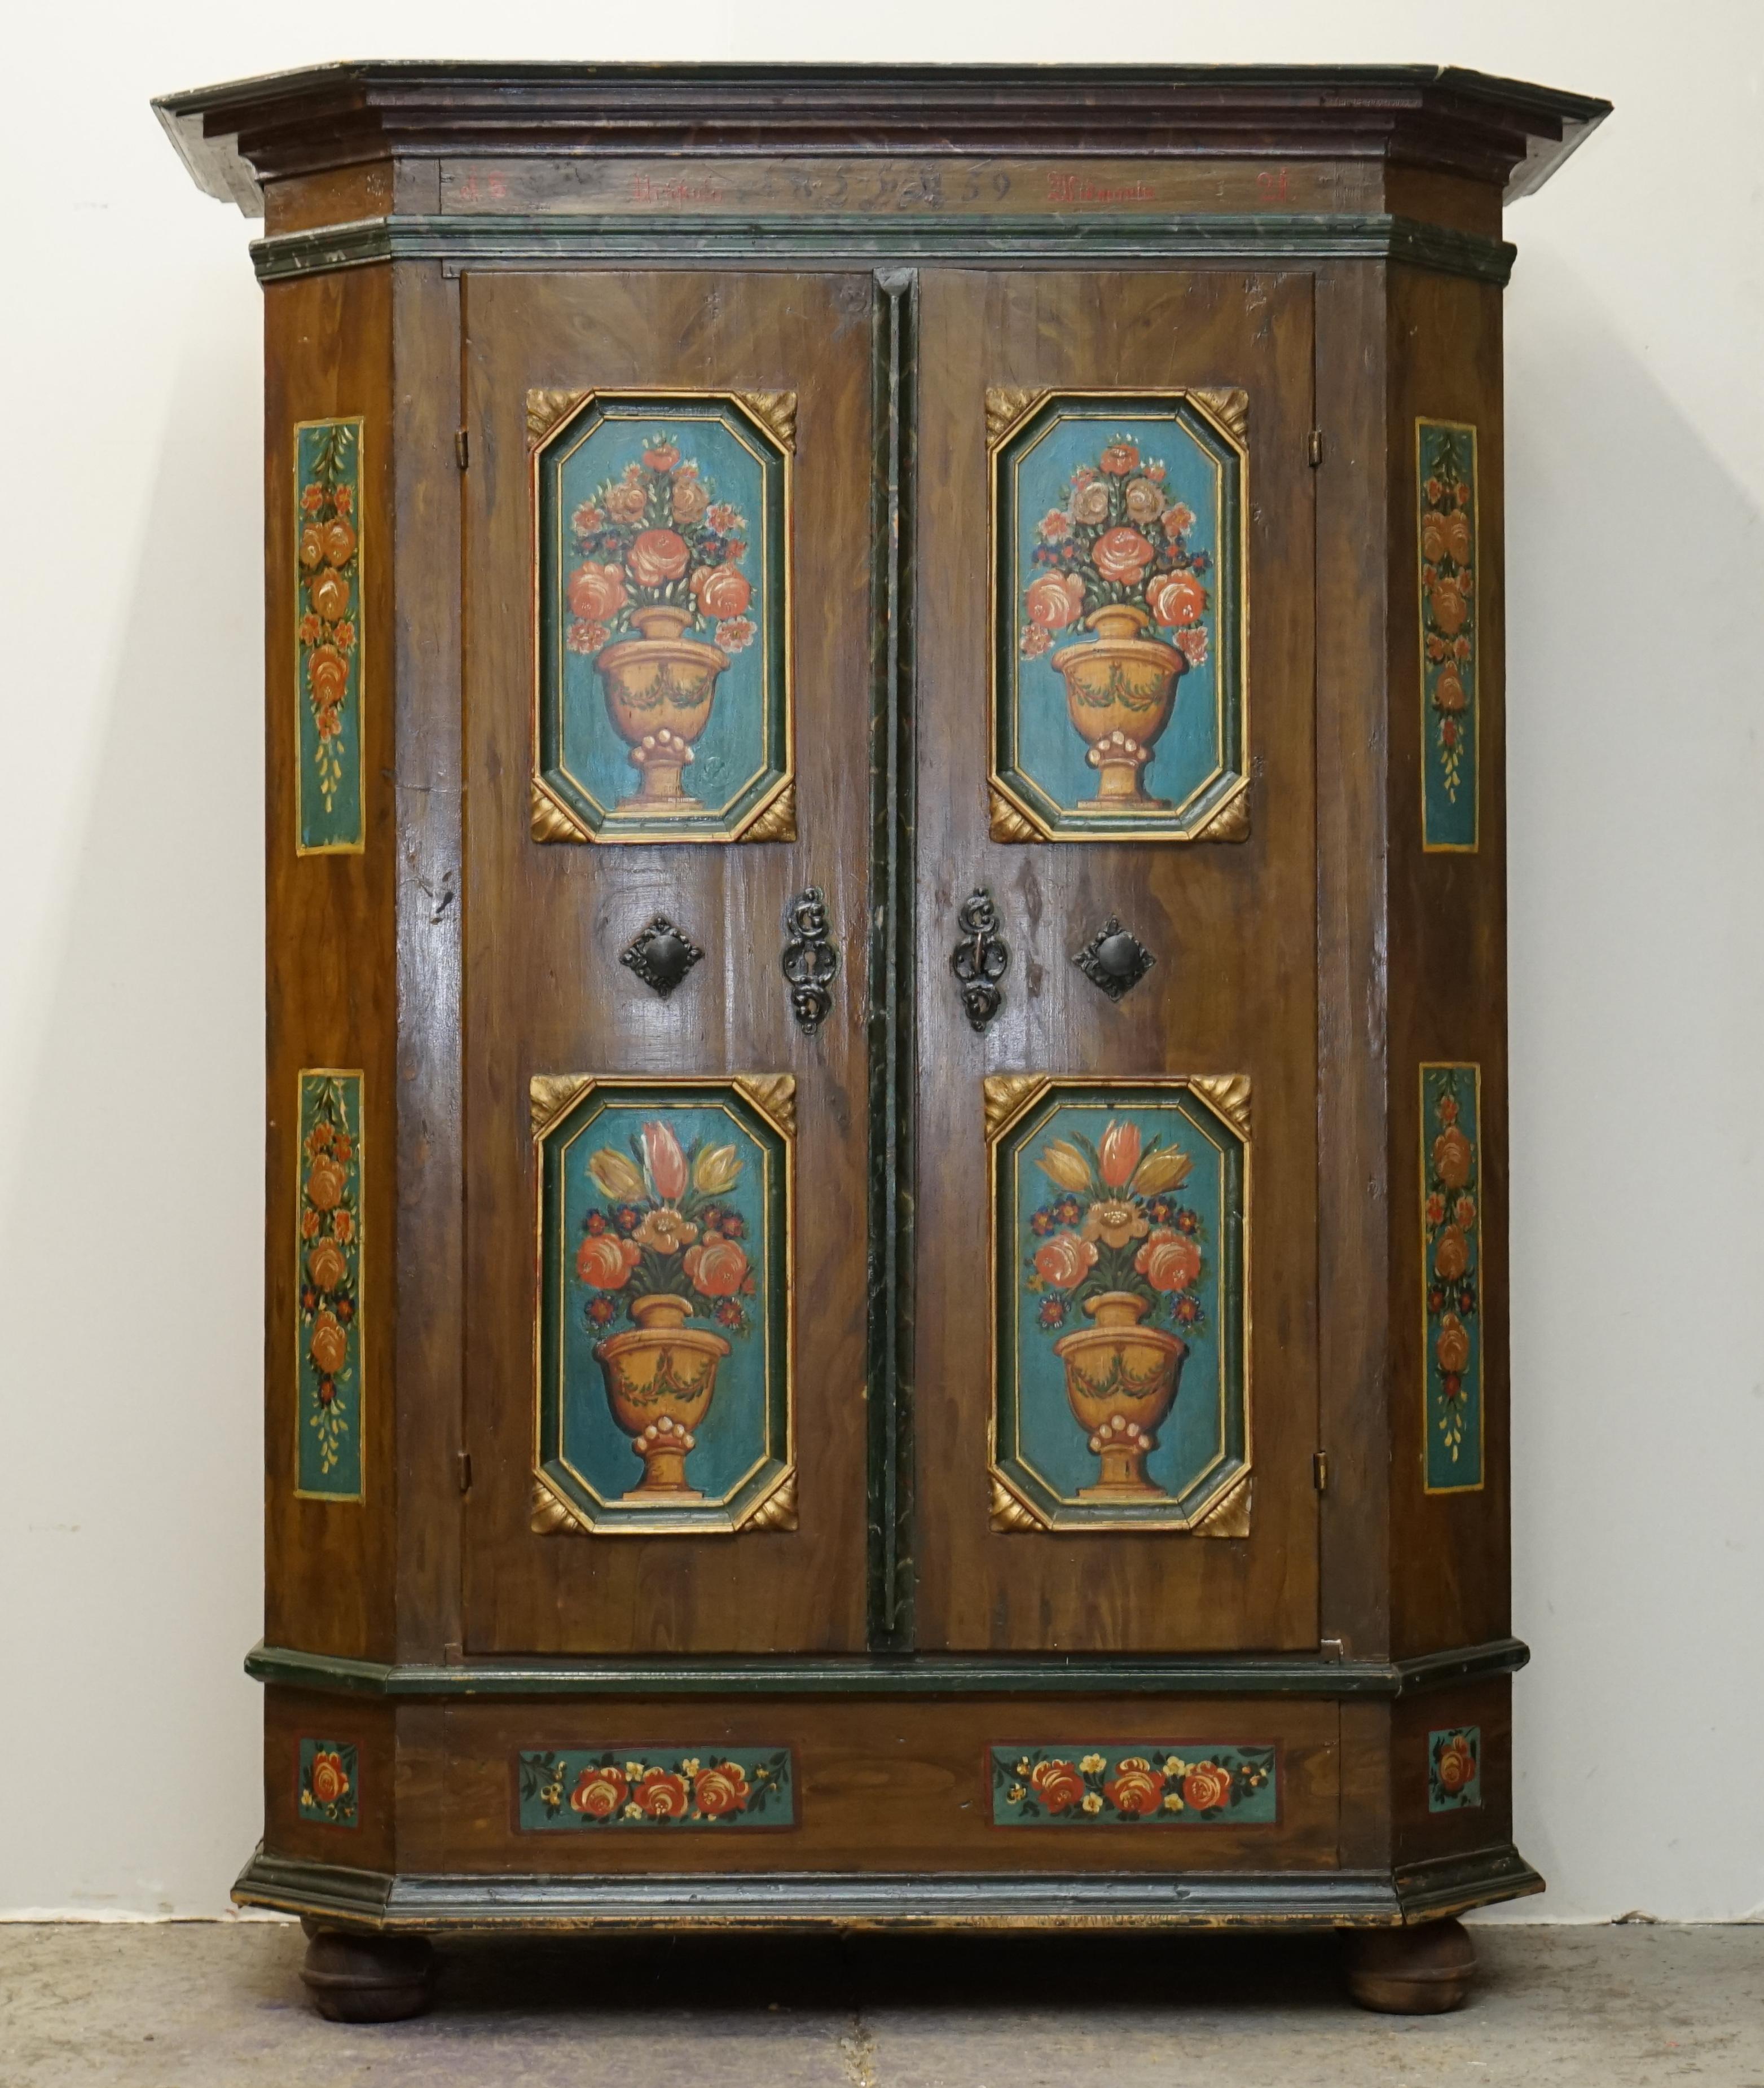 We are delighted to offer for sale this stunning original 1829-1851 dated Antique German Marriage wardrobe of large grand proportions 

I have recently purchased a very large collection of these original, antique painted wardrobes and trunks, I